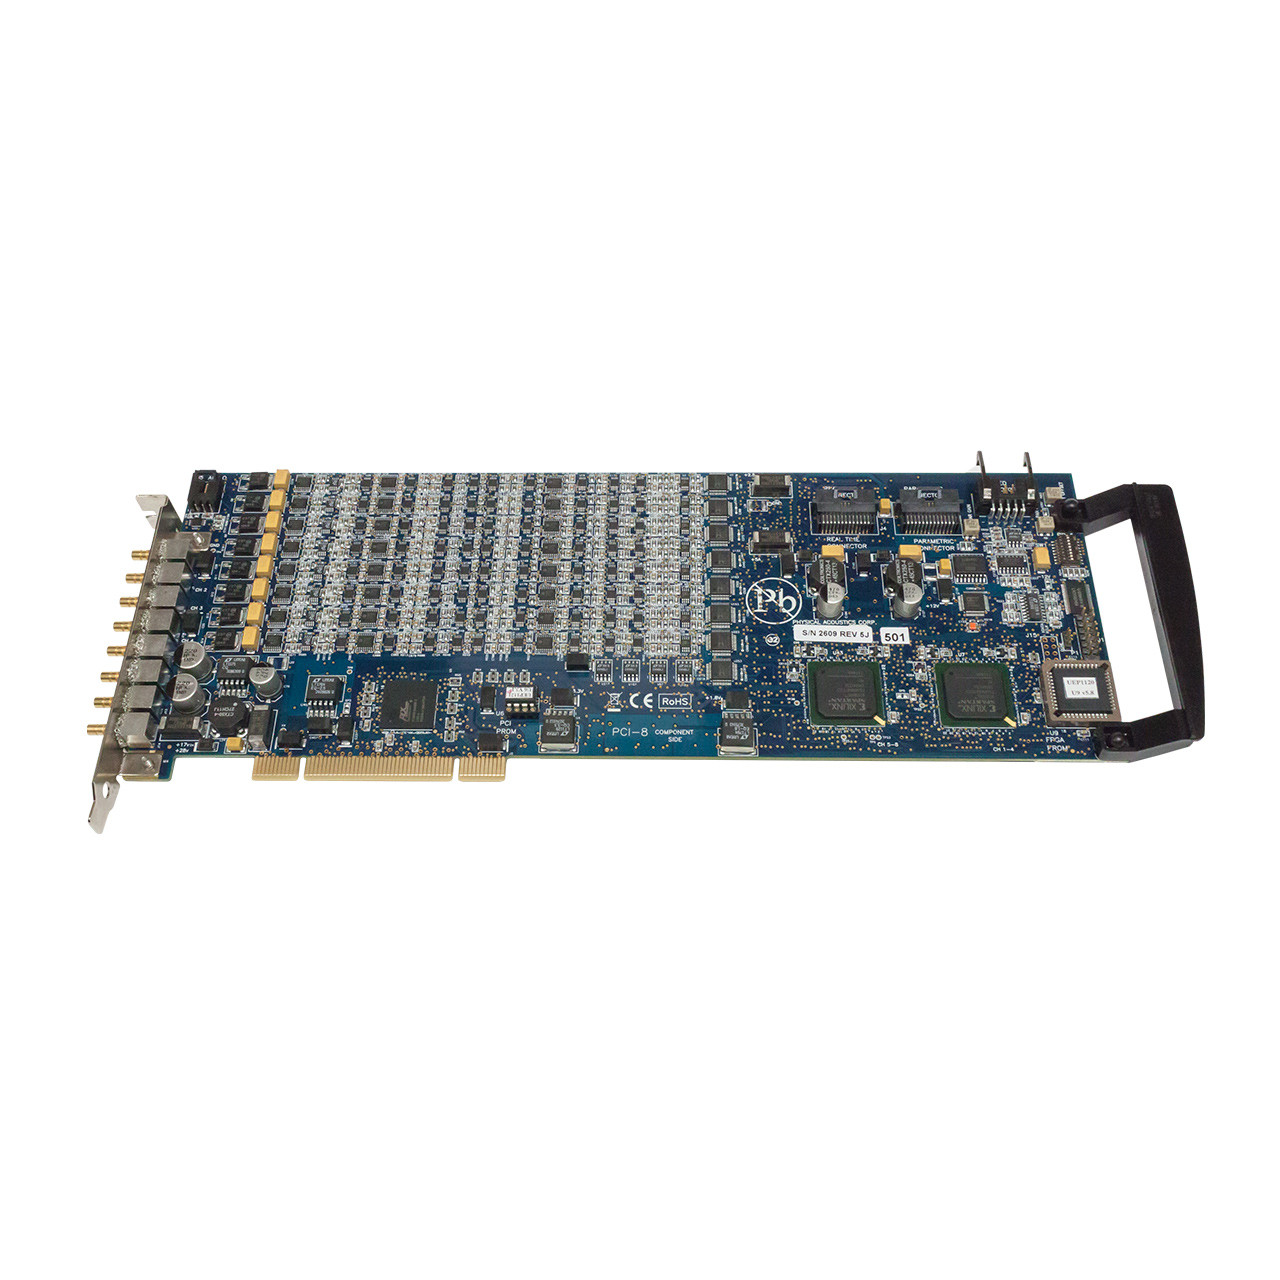 PCI-8™ – PCI-Based Eight-Channel AE Board & System, by Physical